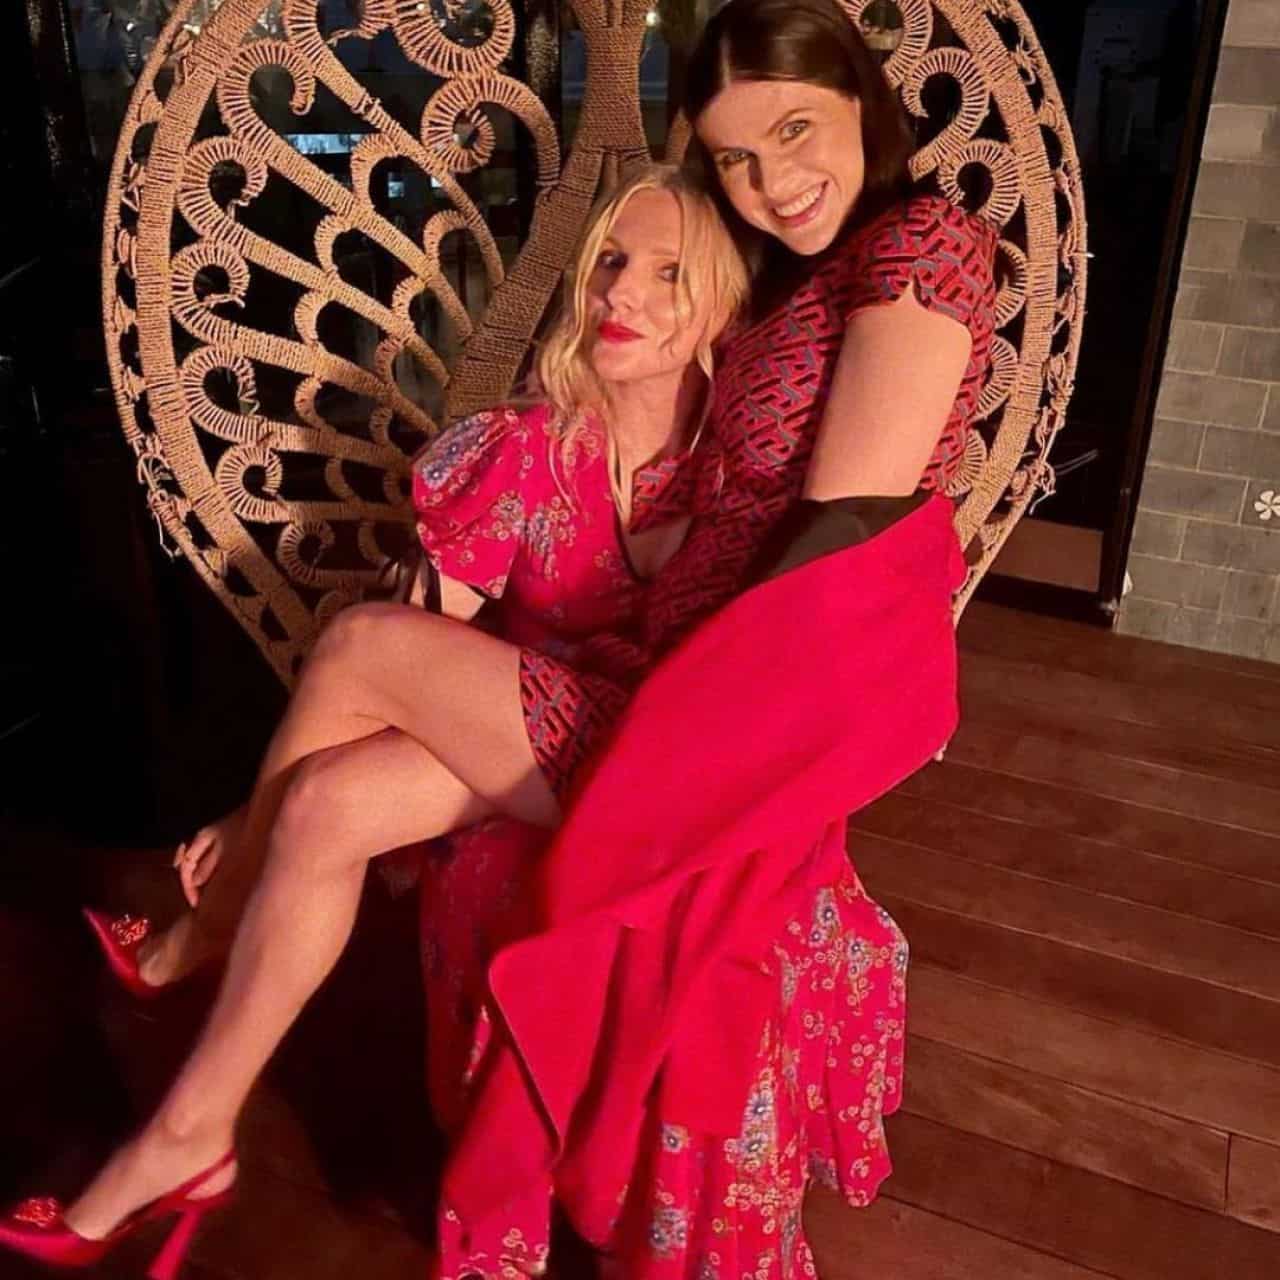 Alexandra Daddario in Versace’s Dress Posed with InStyle’s Laura Brown